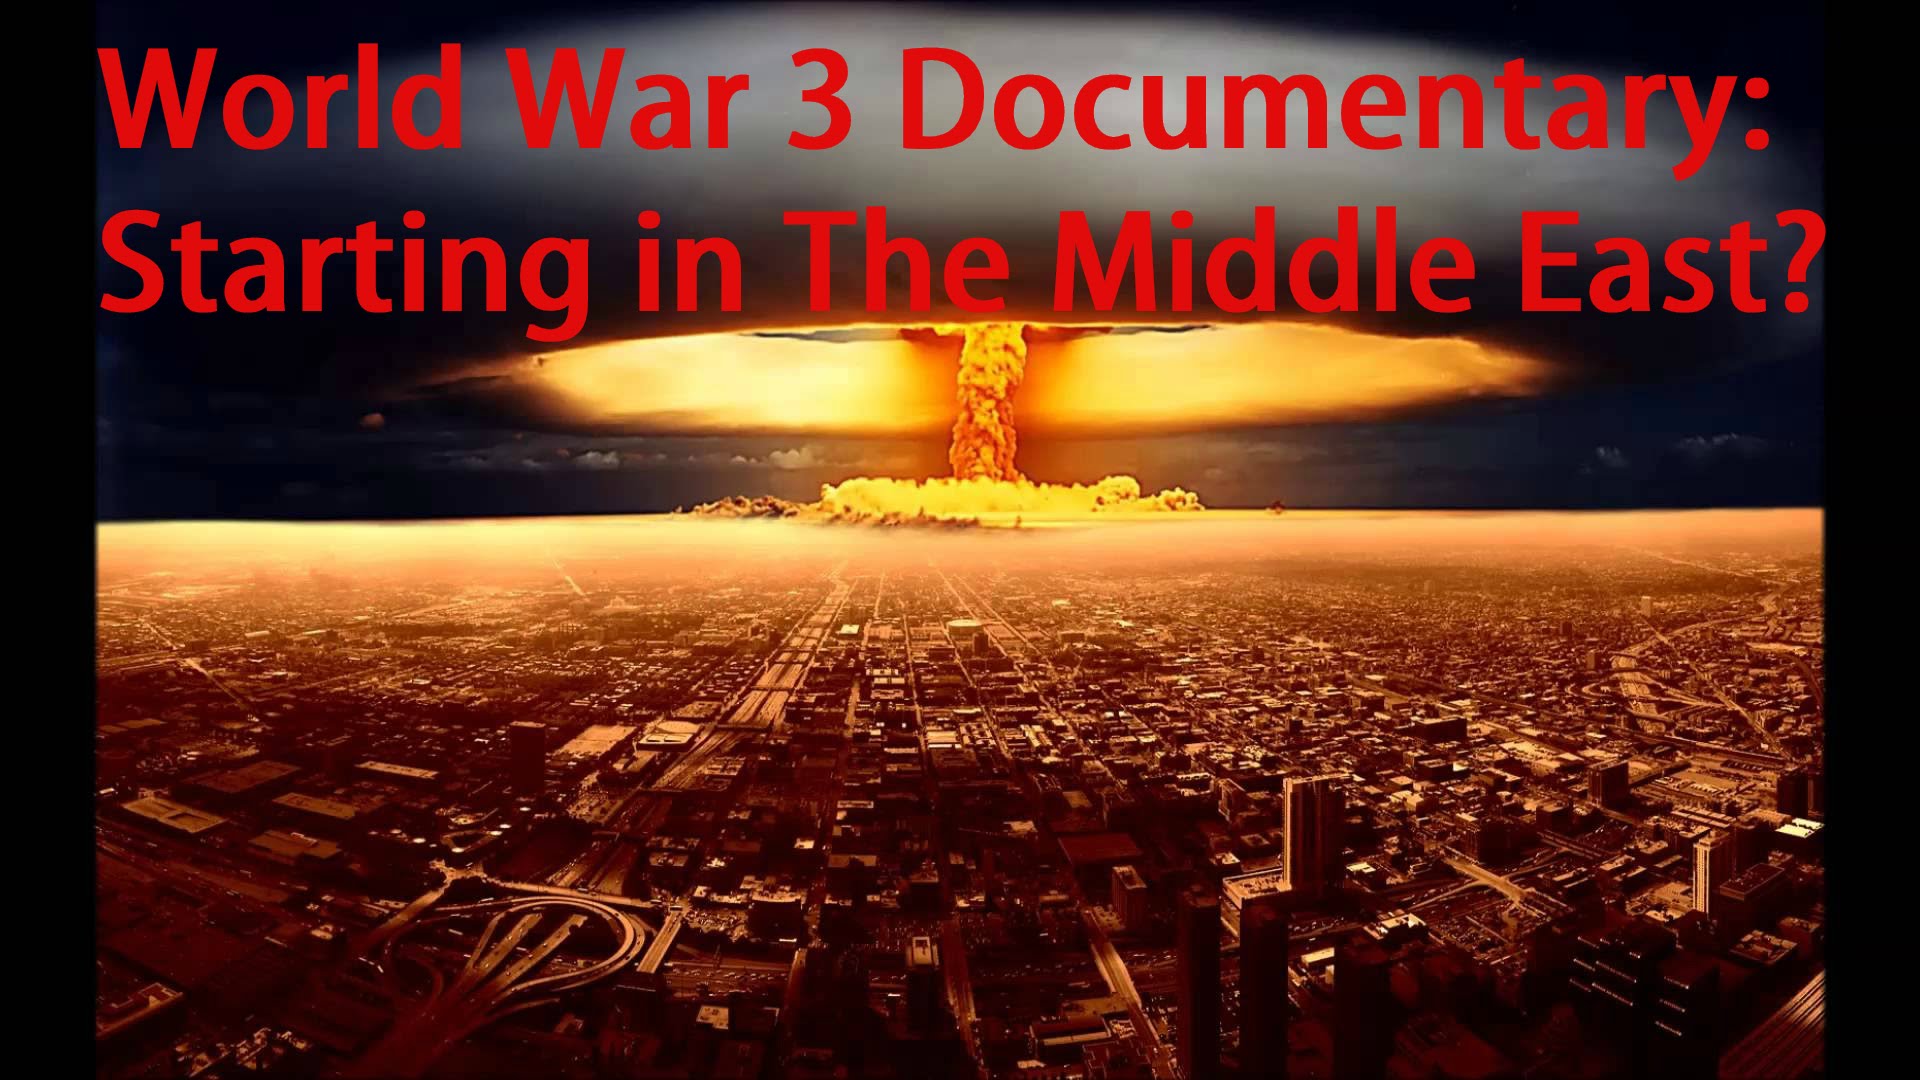 World War 3 Starting in the Middle East Documentary